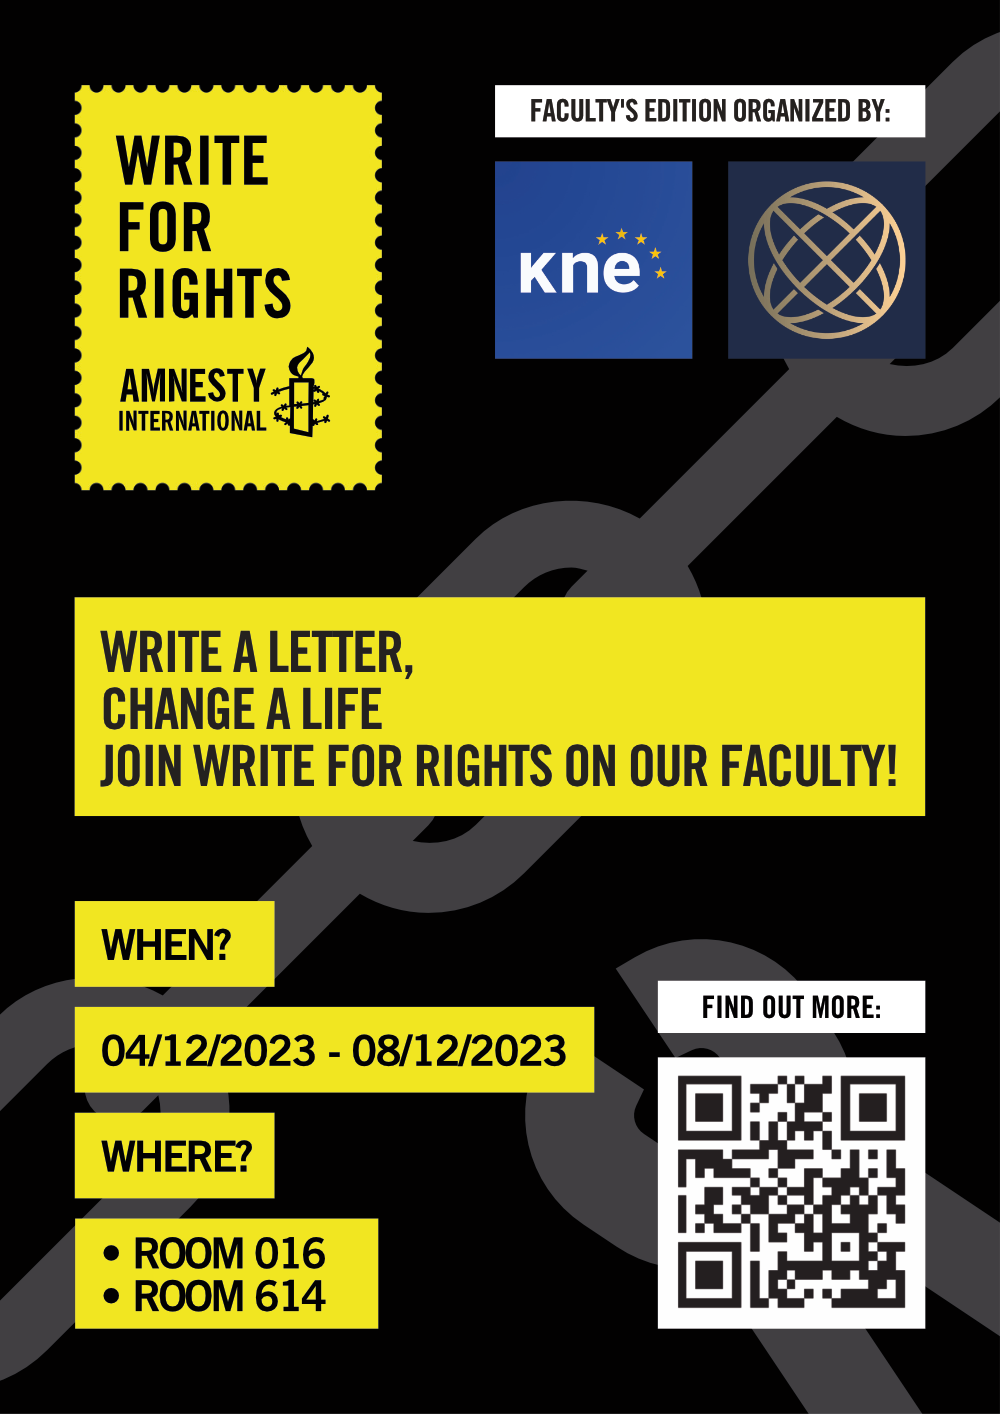 Write for rights Amnesty International campaign poster